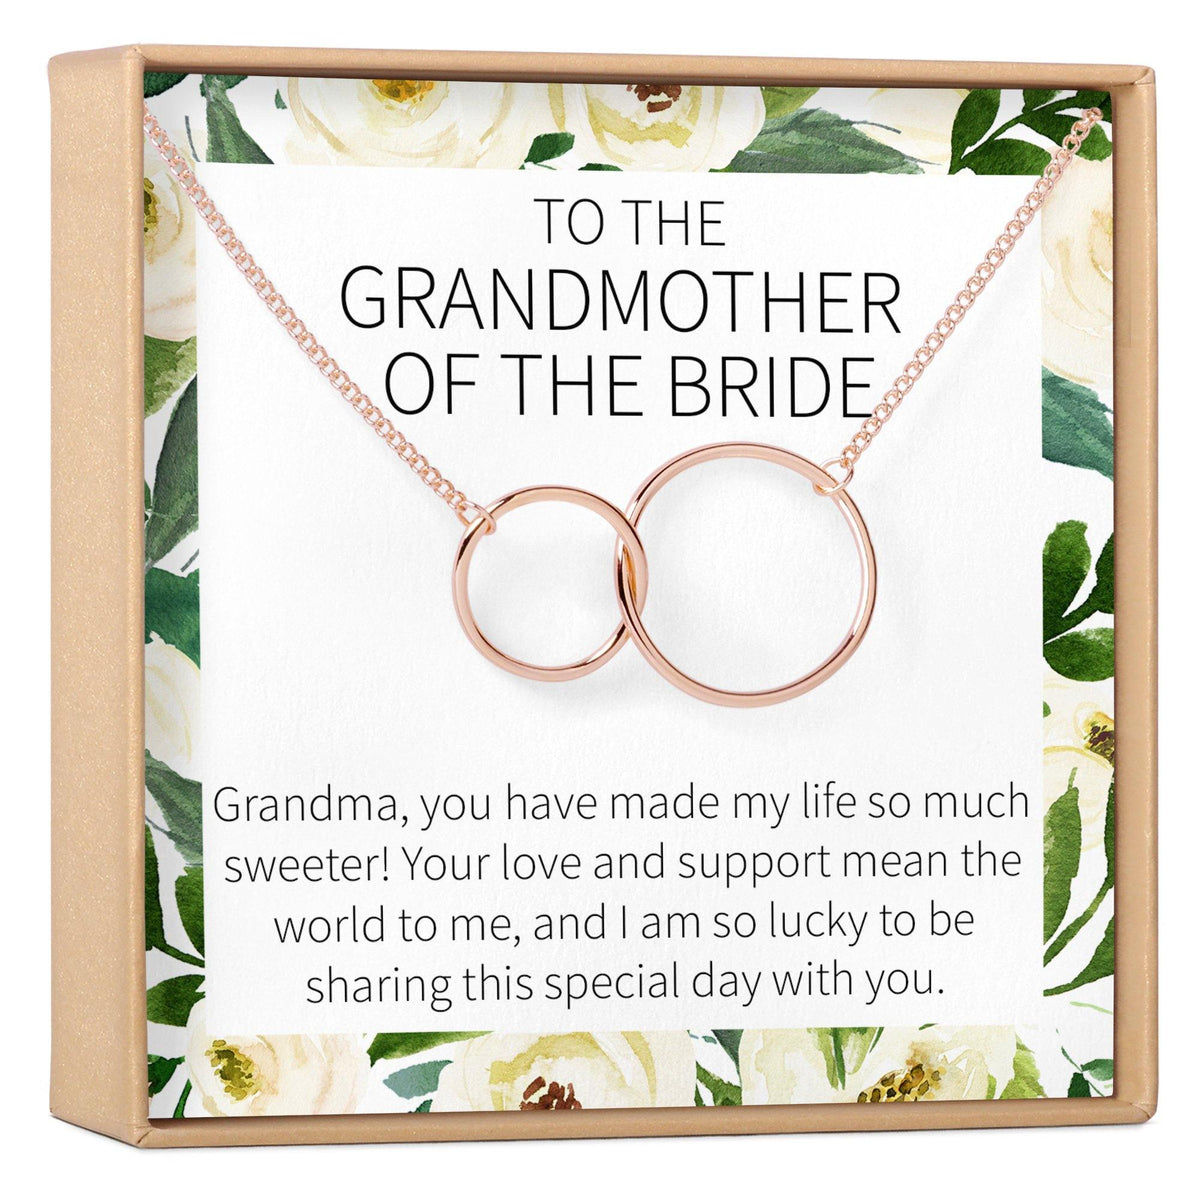 Grandmother of the Bride - Dear Ava, Jewelry / Necklaces / Pendants